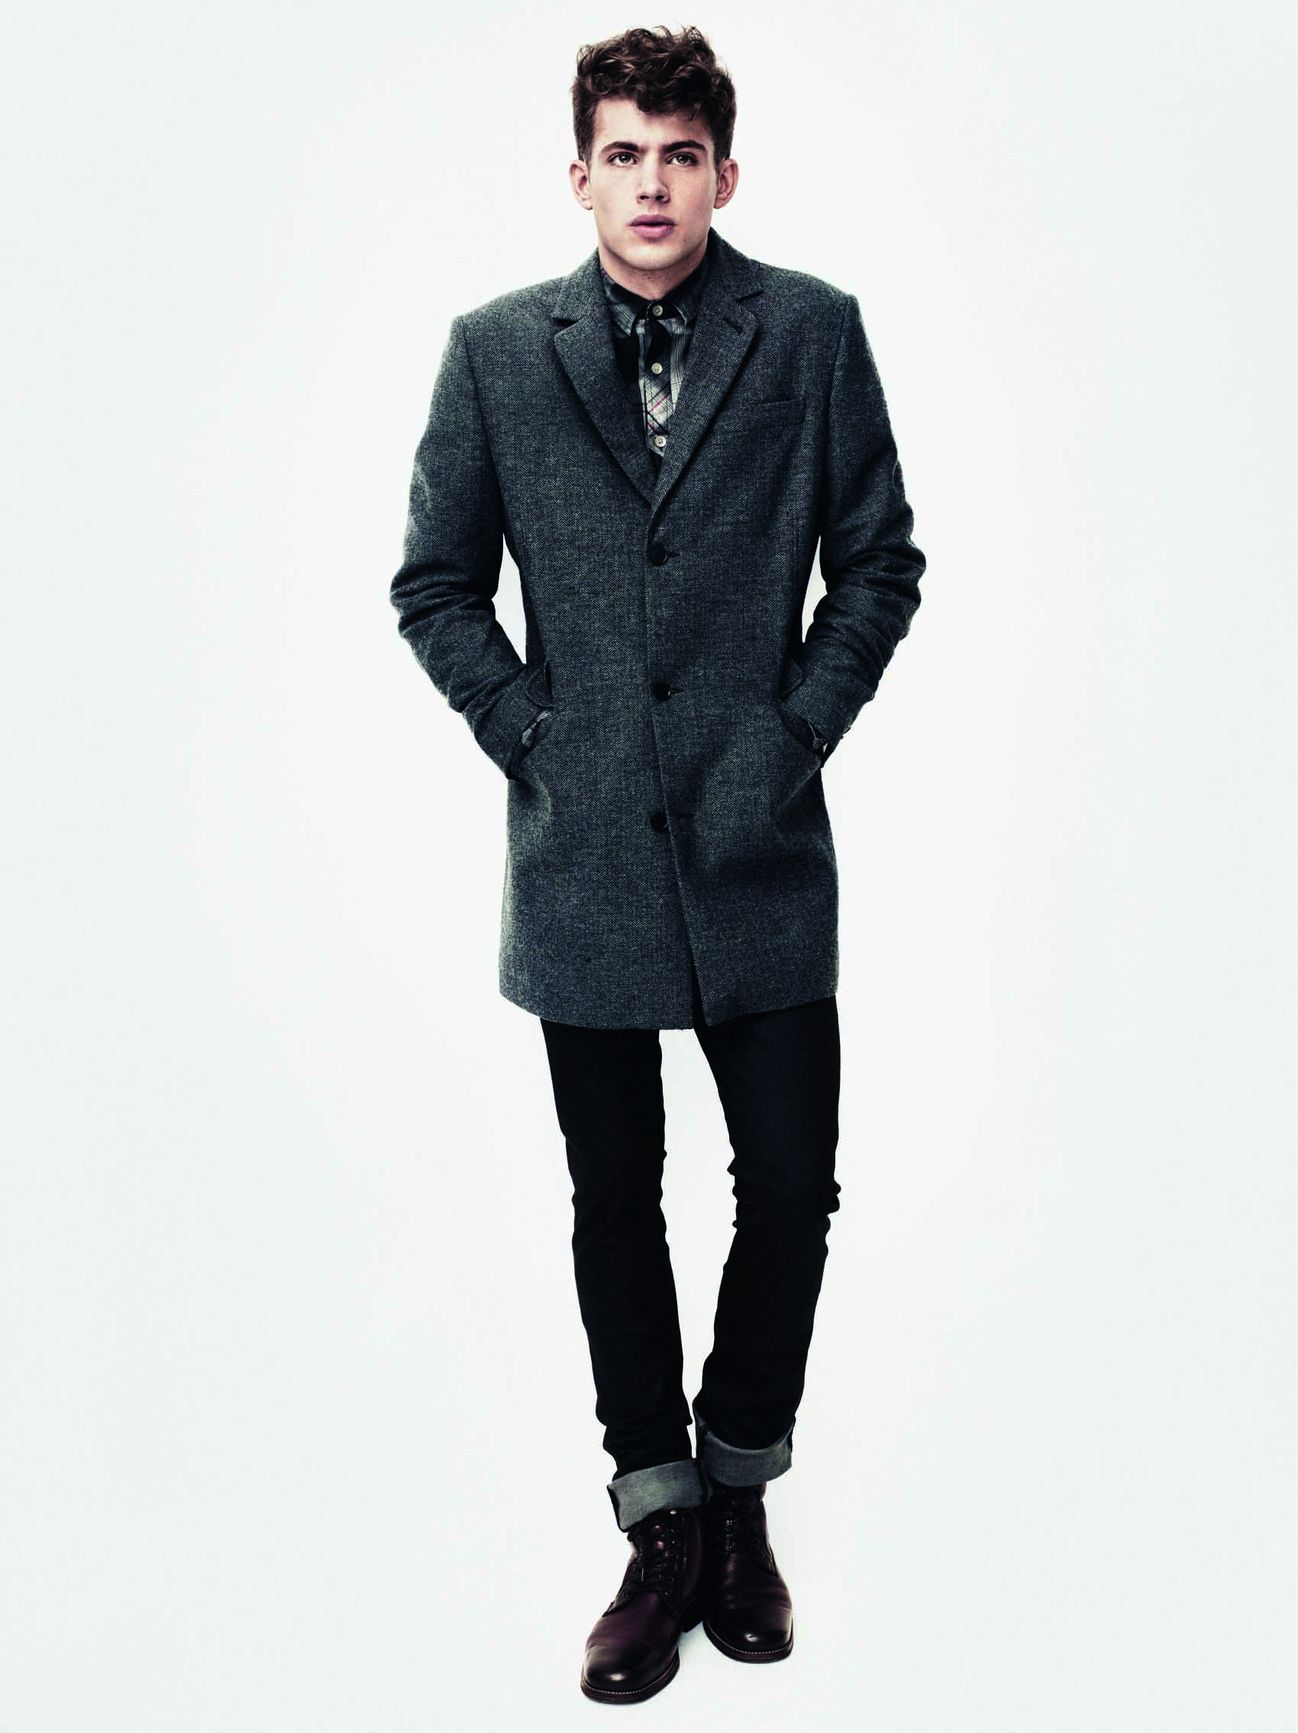 ... Jamie Wise poses for the fall winter Zara Young campaign imagery